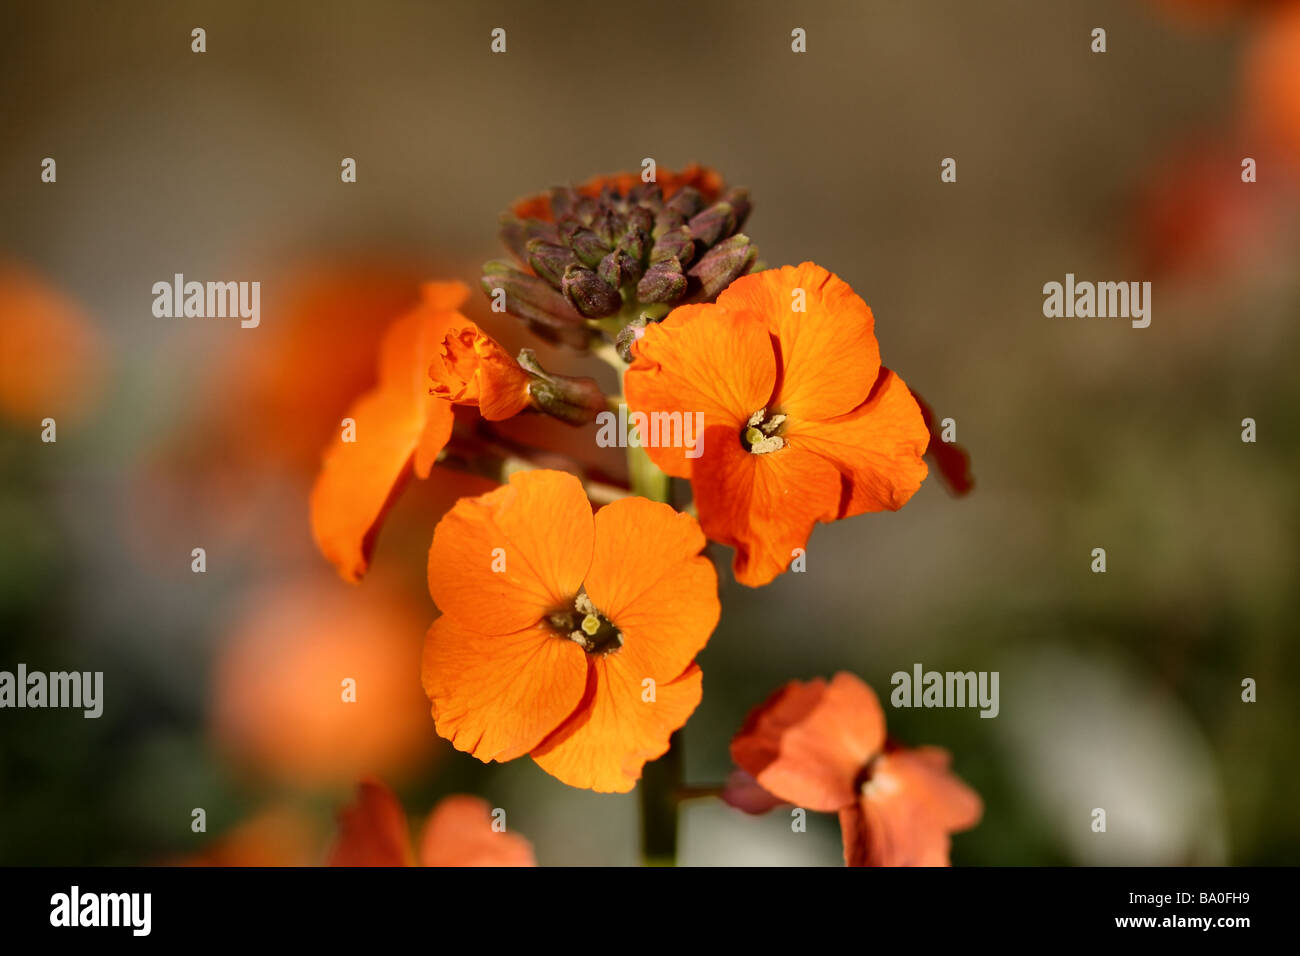 Erysimum,Wall Flower,Orange bloom in close up or macro showing flower detail and structure also in Blue,White colour forms Stock Photo